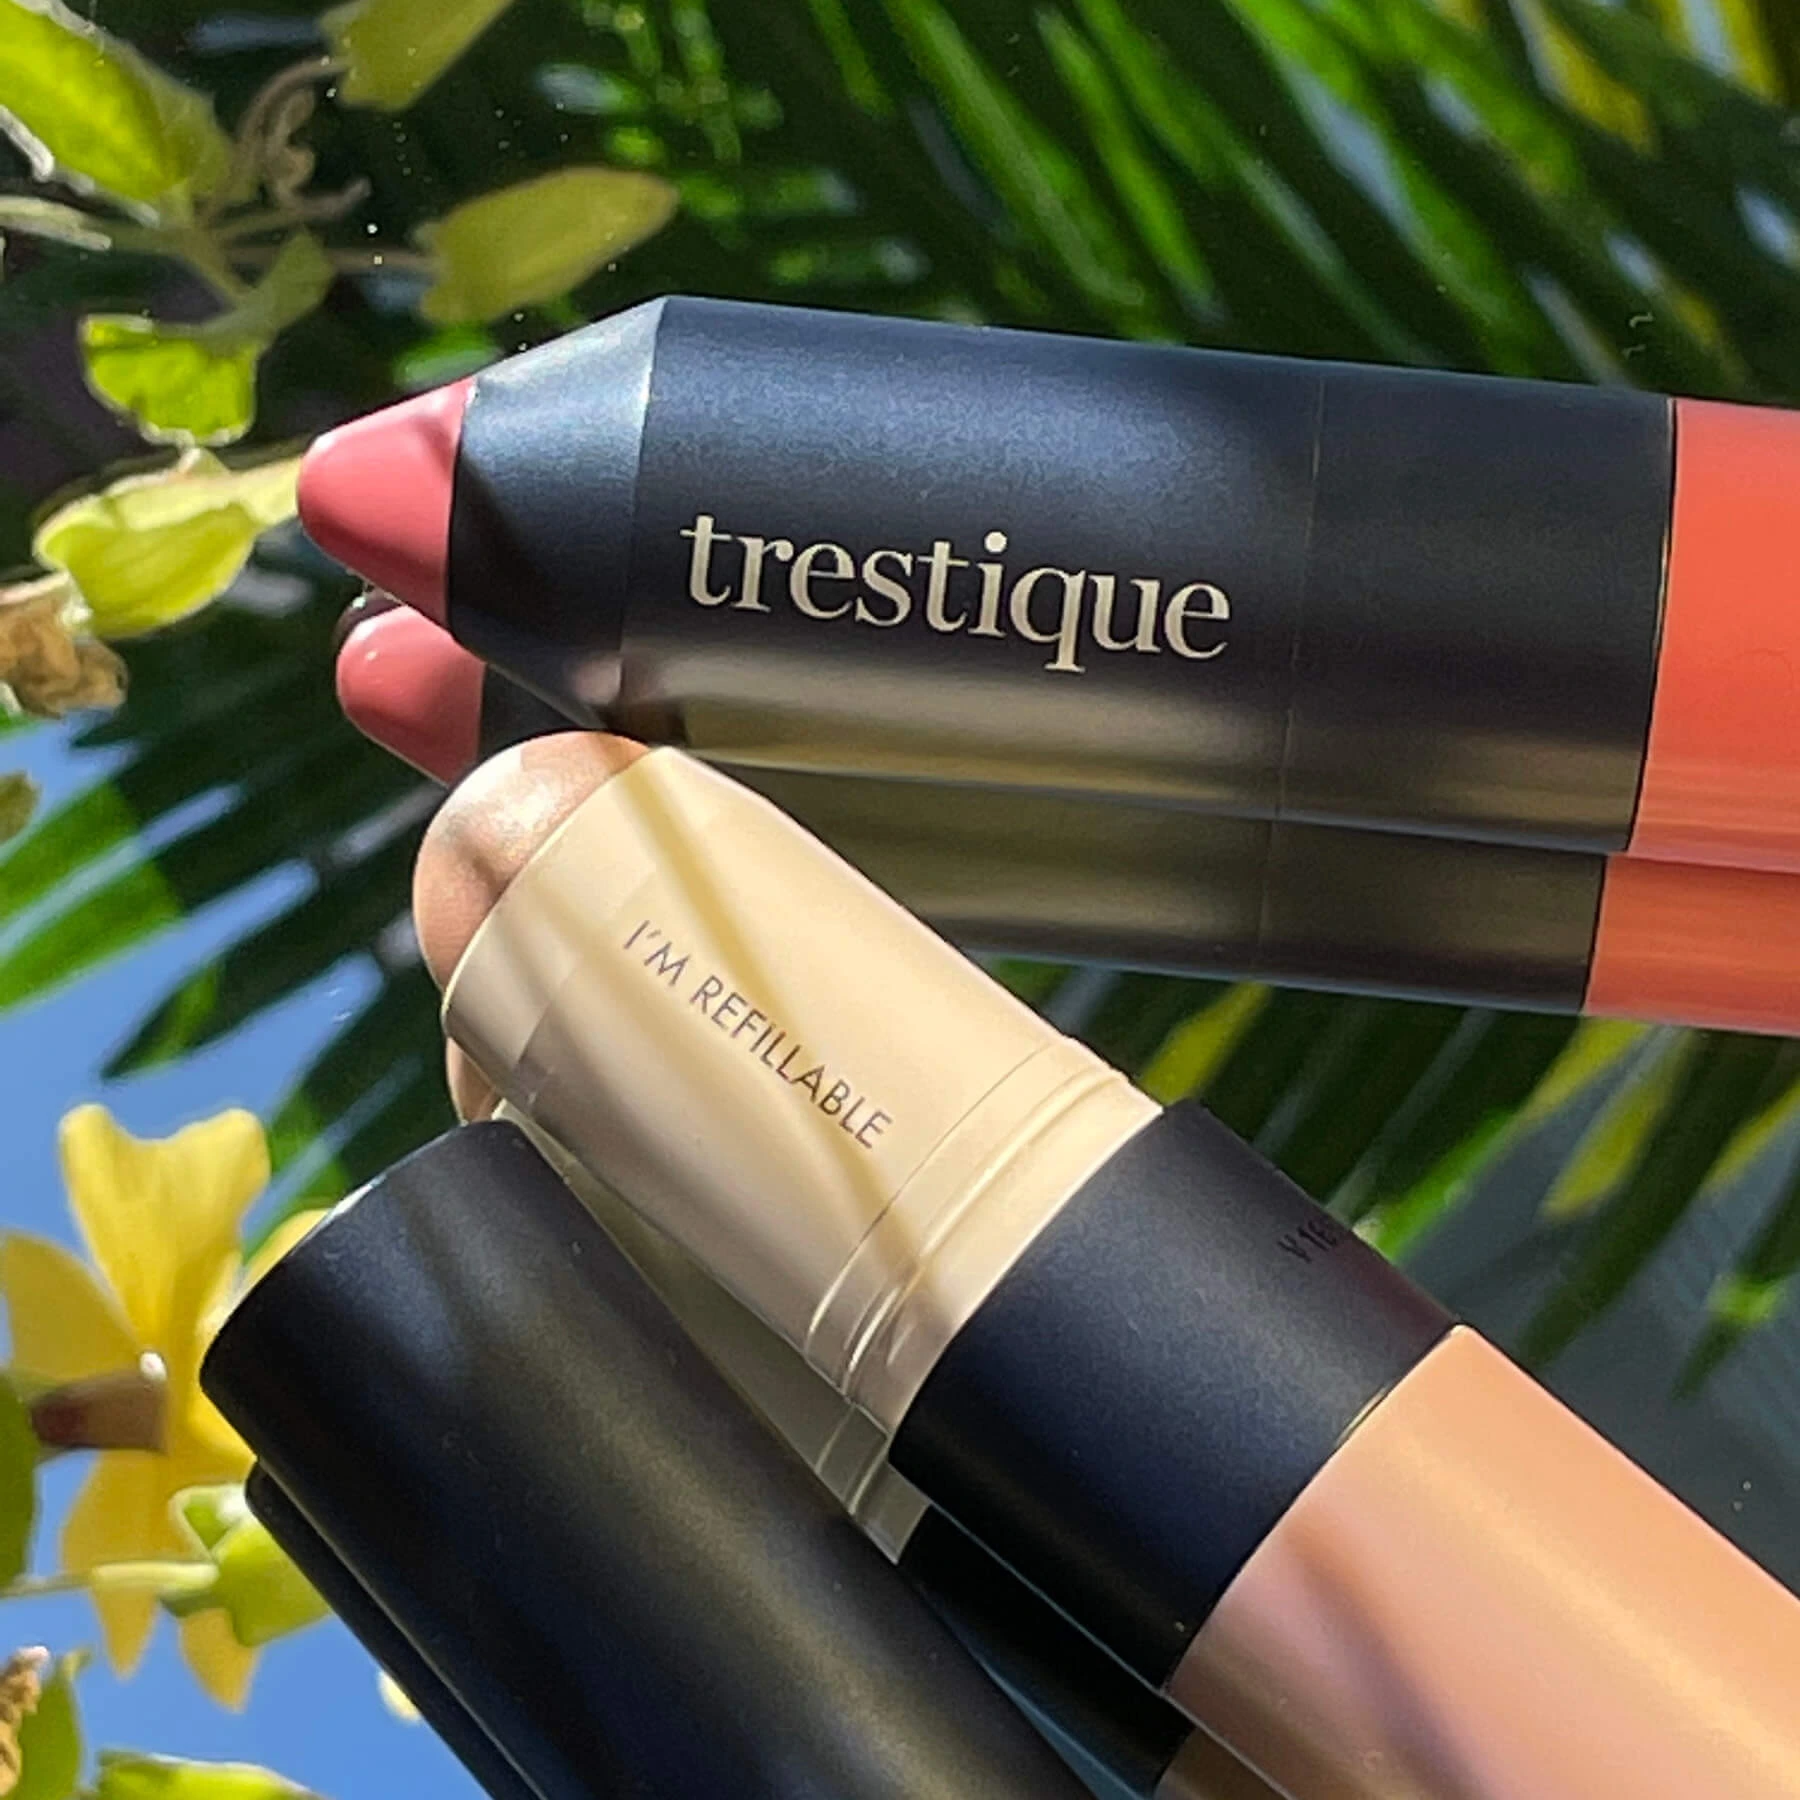 trestique products against a blue sky with foliage indicating a sustainable beauty brand